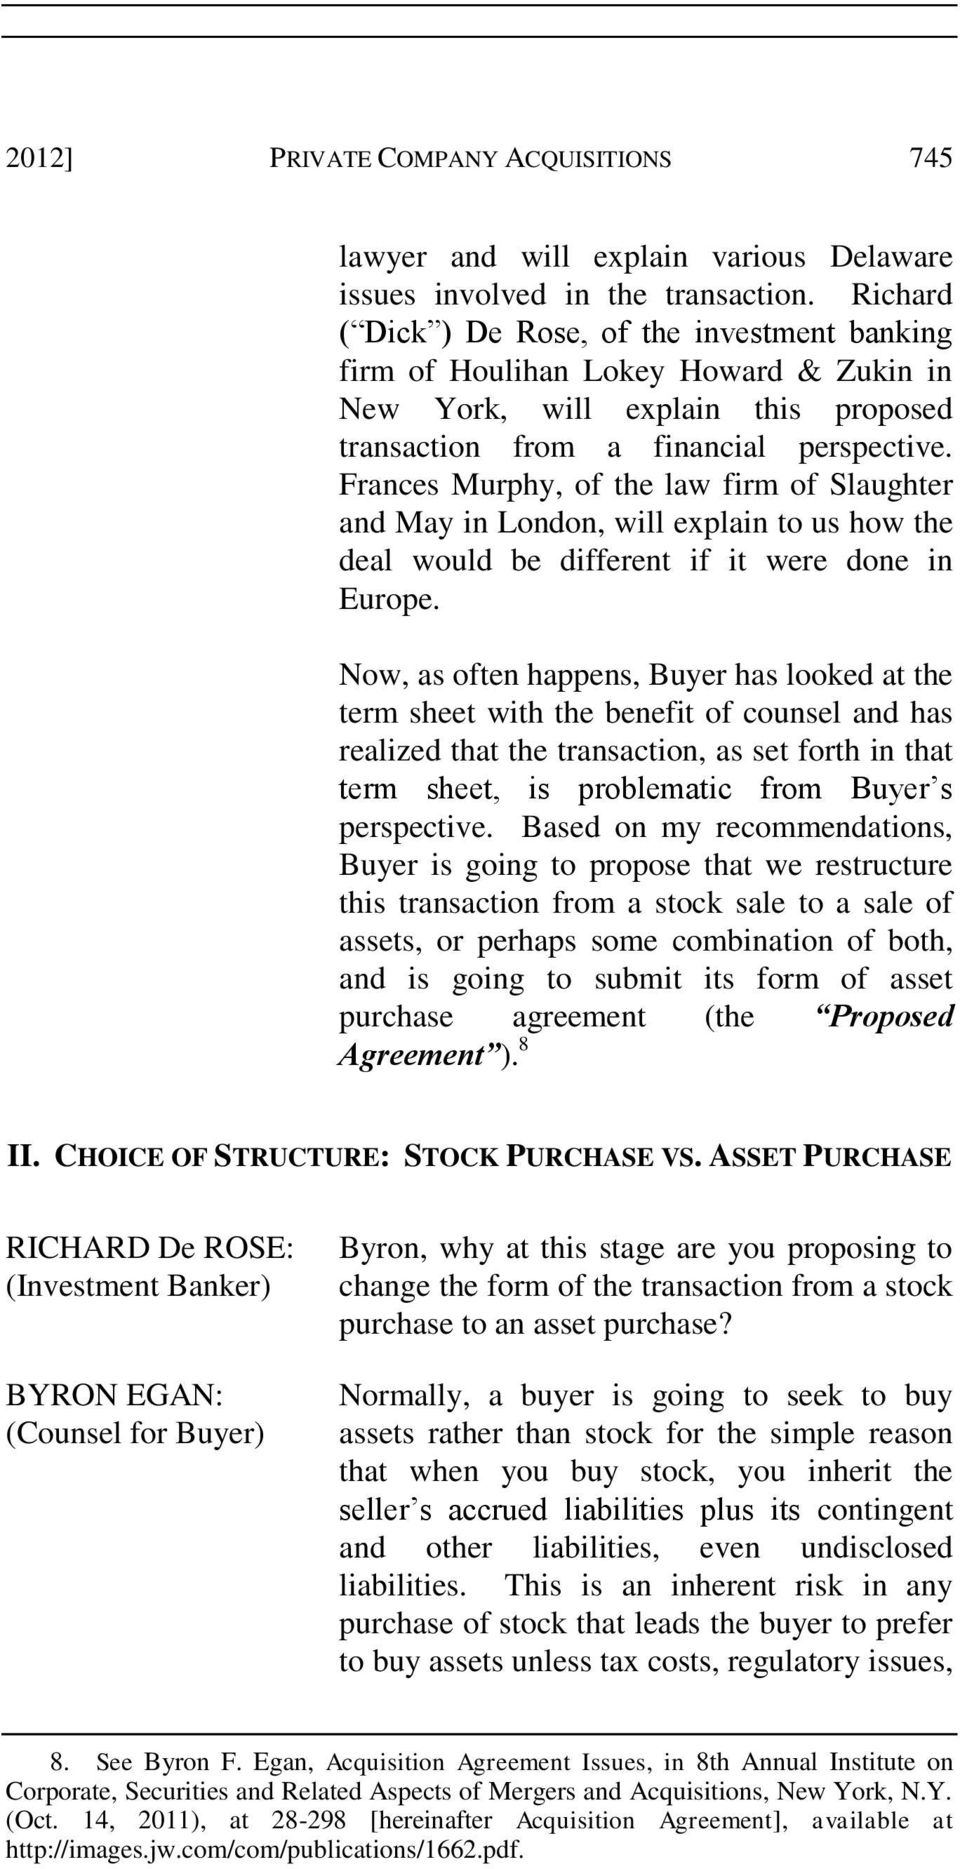 Asset Purchase Agreement Vs Stock Purchase Private Company Acquisitions A Mock Negotiation 1 Pdf